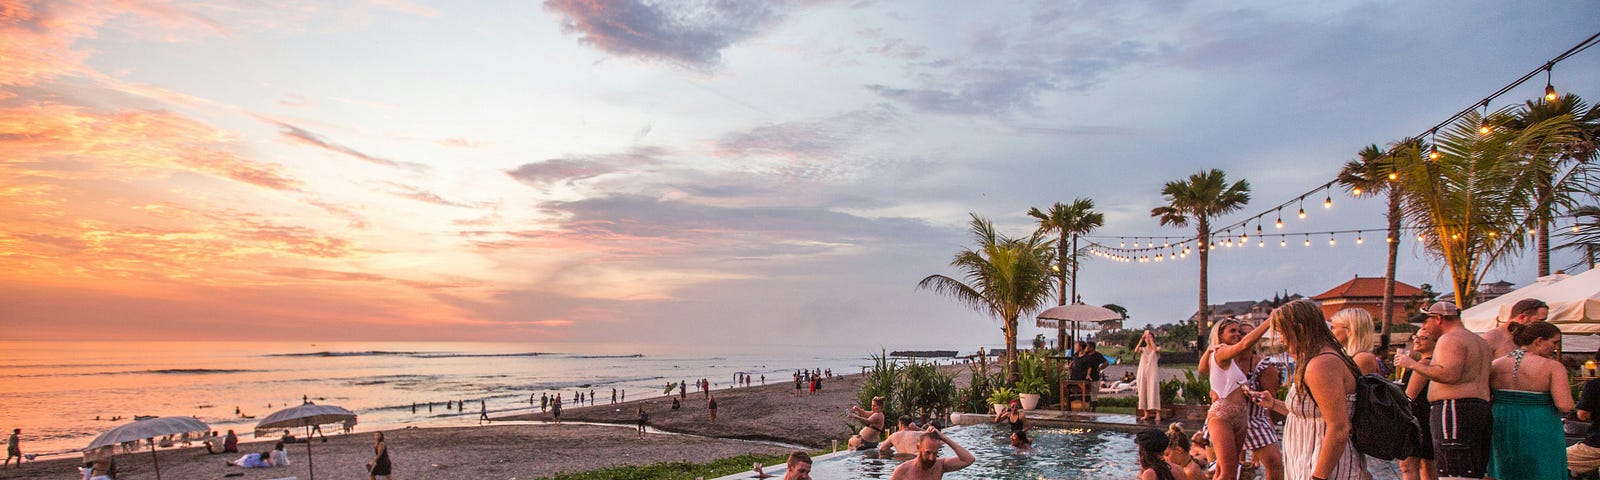 A pool full of white tourists taking pictures of themselves in front of the Balinese sunset on the beach behind them. There are palm trees and string lights framing the pool on the far right side.